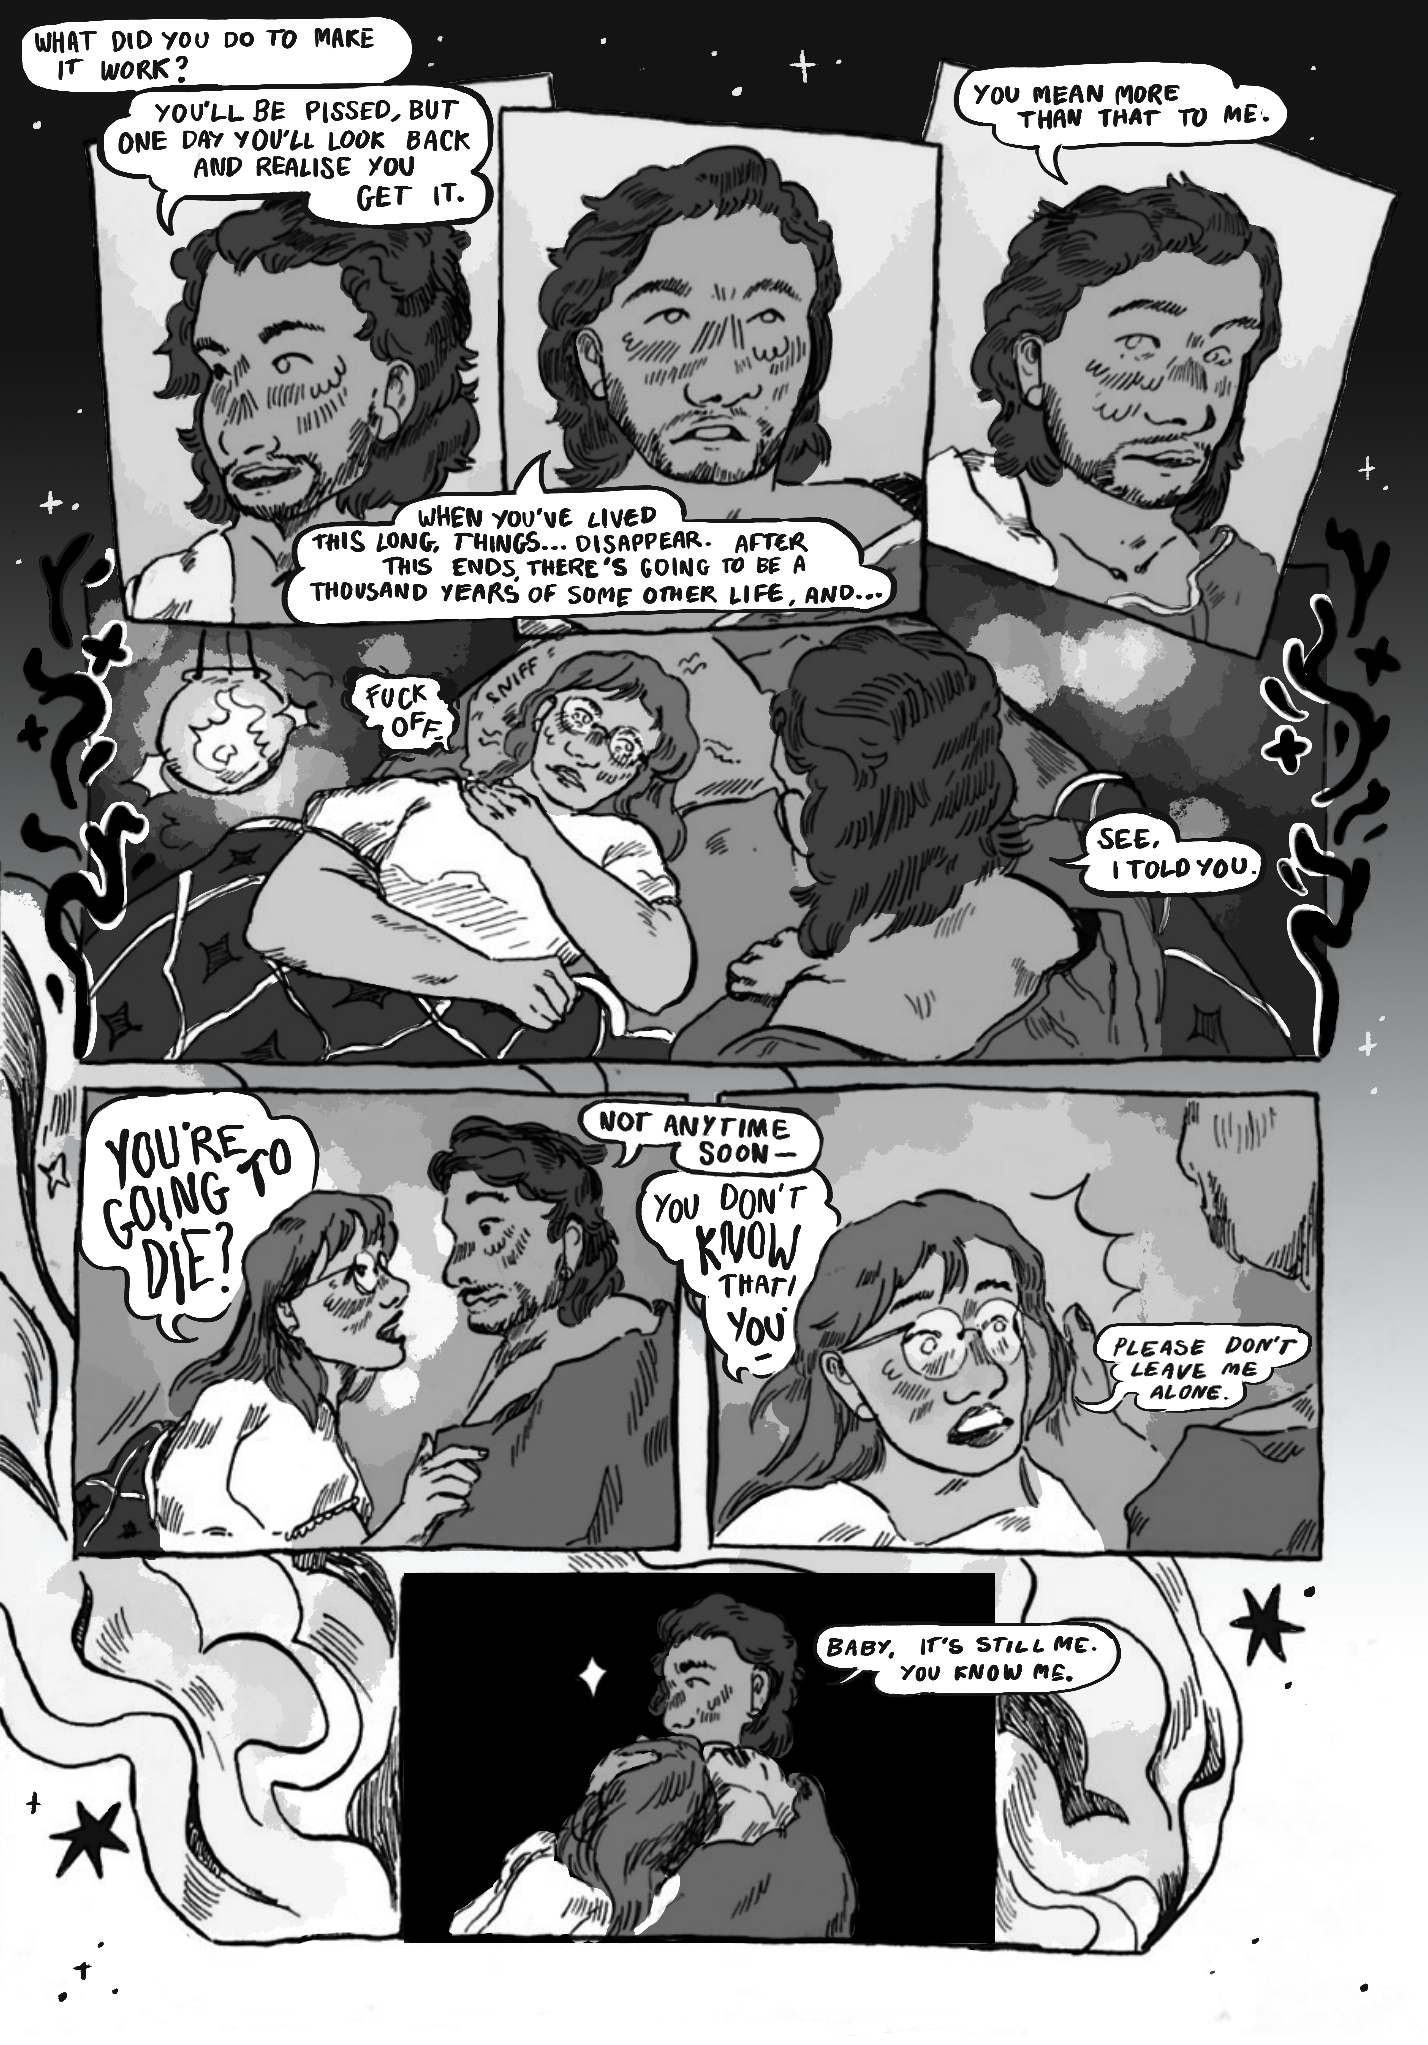 A black and white comic page of Euterpe and her adoptive father having a discussion while sharing a hammock together. Her father is saying how he quieted the being, saying that he gave up his immortality to save them both. Euterpe gets freaked out by this, but her father promises he'll protect them both. The background behind the panels is full of swirling smoke.